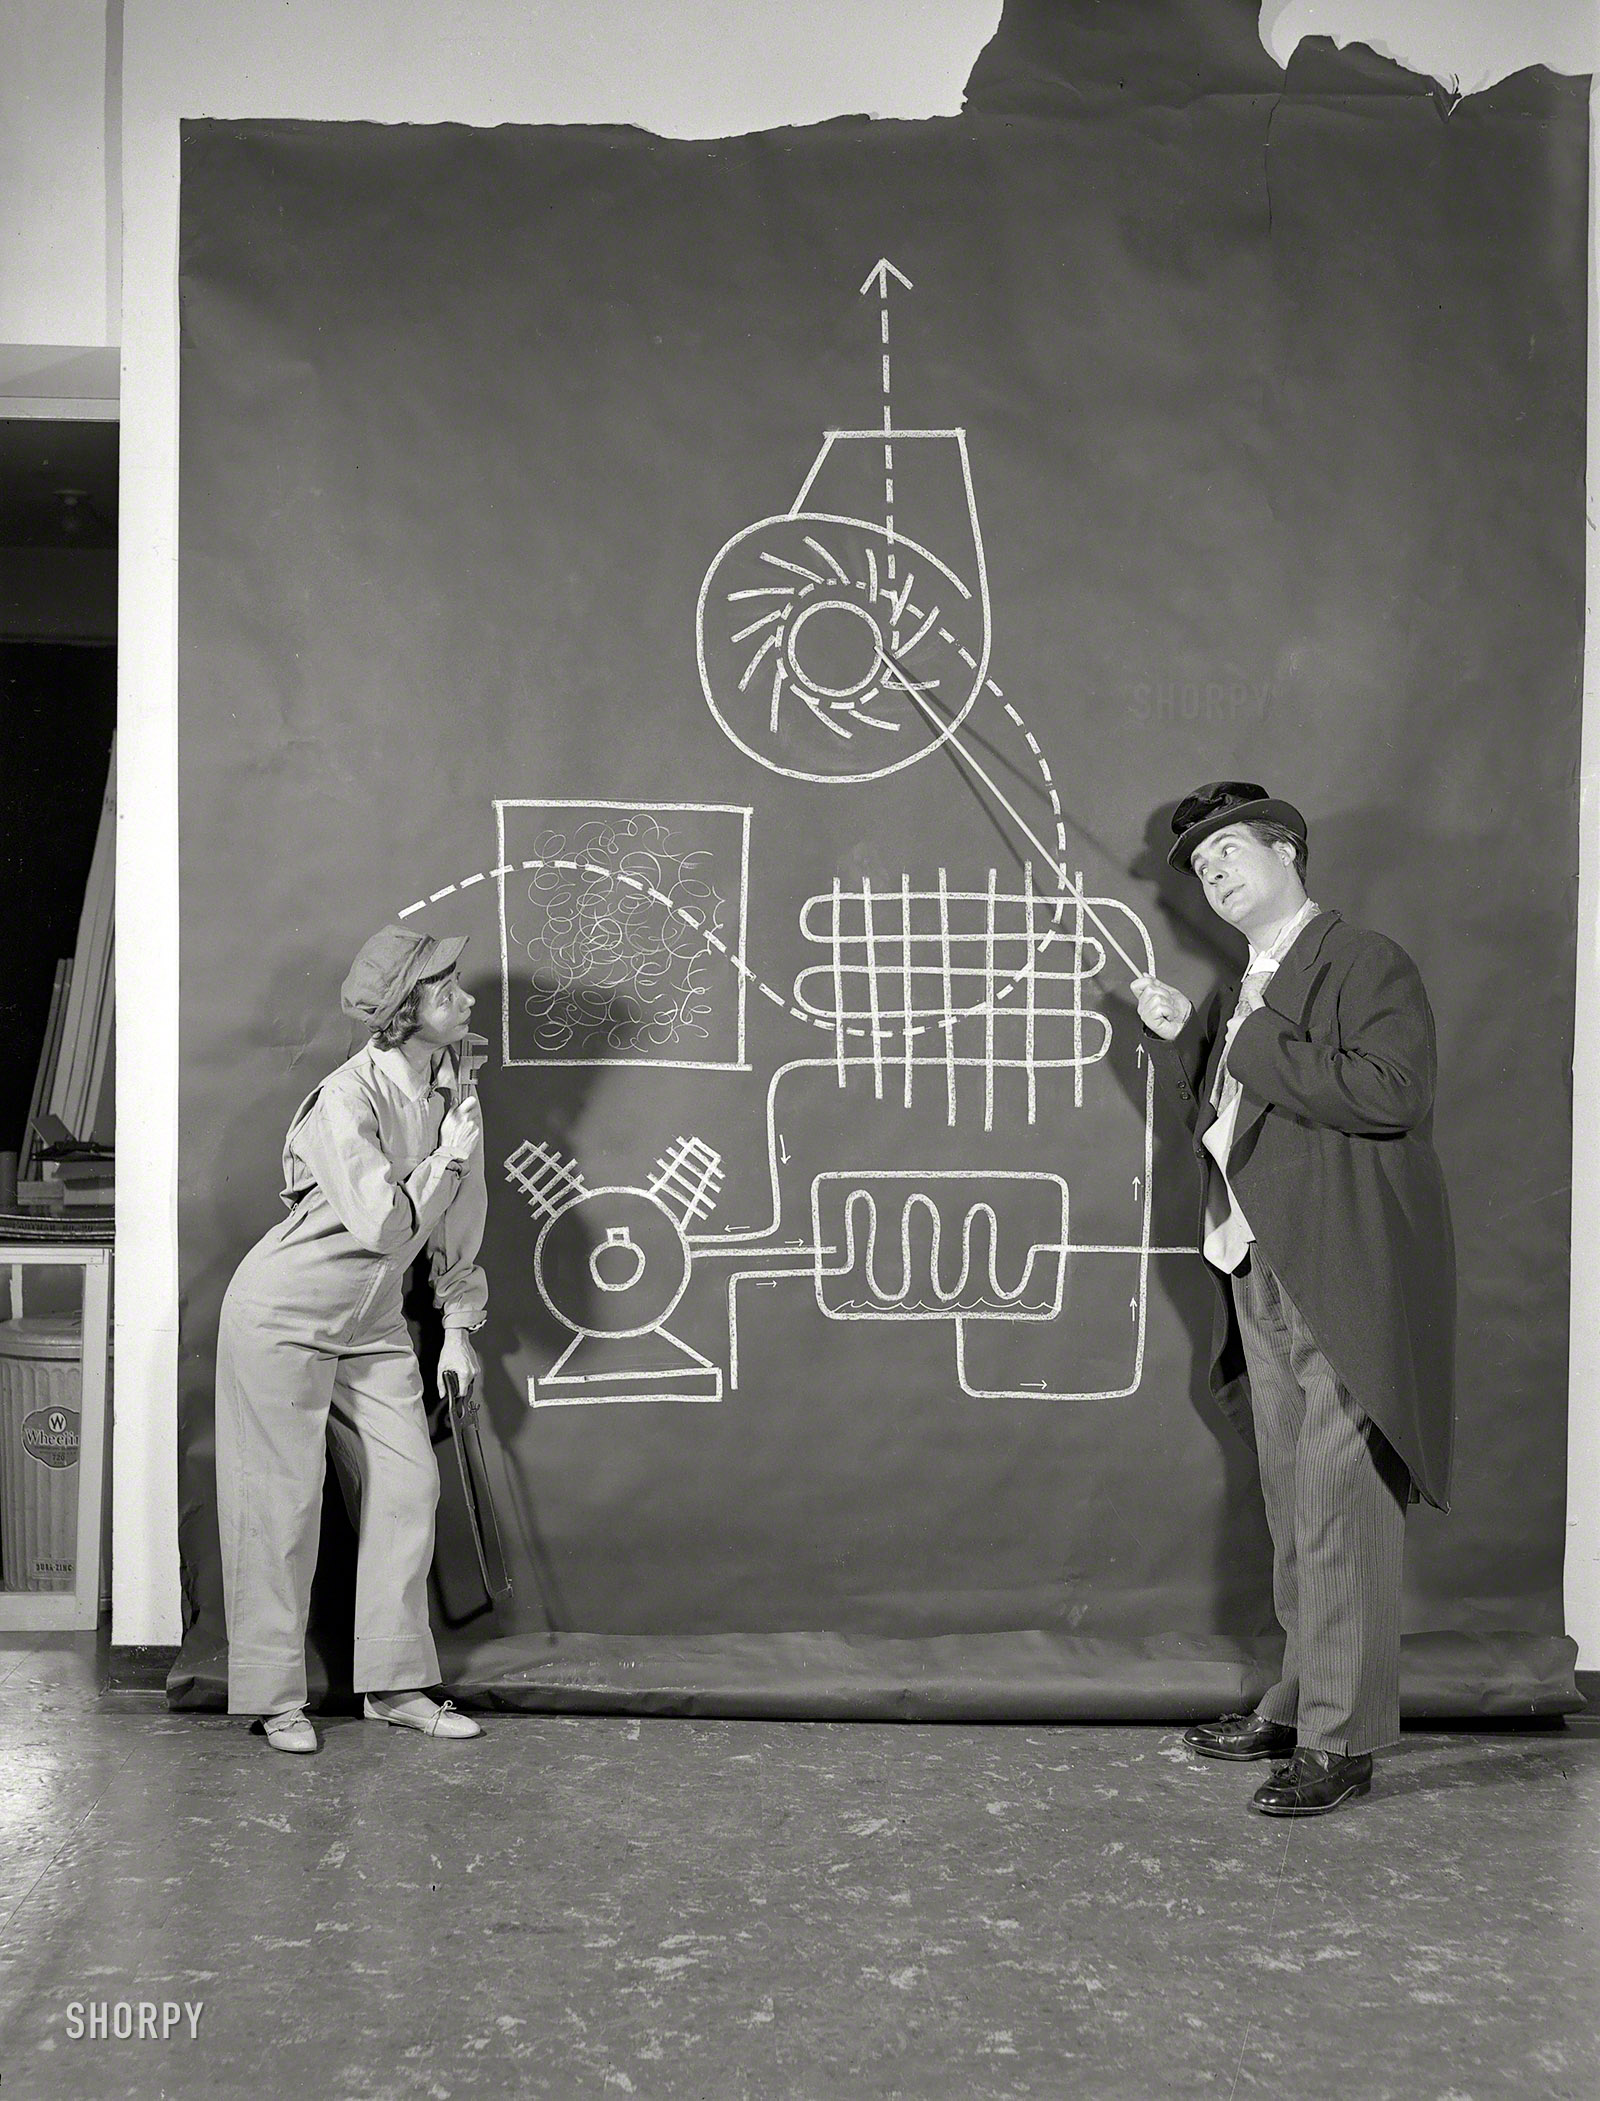 April 1953. "Comedians Sid Caesar and Imogene Coca posed in humorous situations with air conditioning units. Includes Caesar dressed in his 'professor' costume and Coca dressed as a mechanic, looking at a diagram of a cooling system." From photos by Arthur Rothstein and John Vachon for the Look magazine assignment "Air Conditioning -- How It Works." View full size.